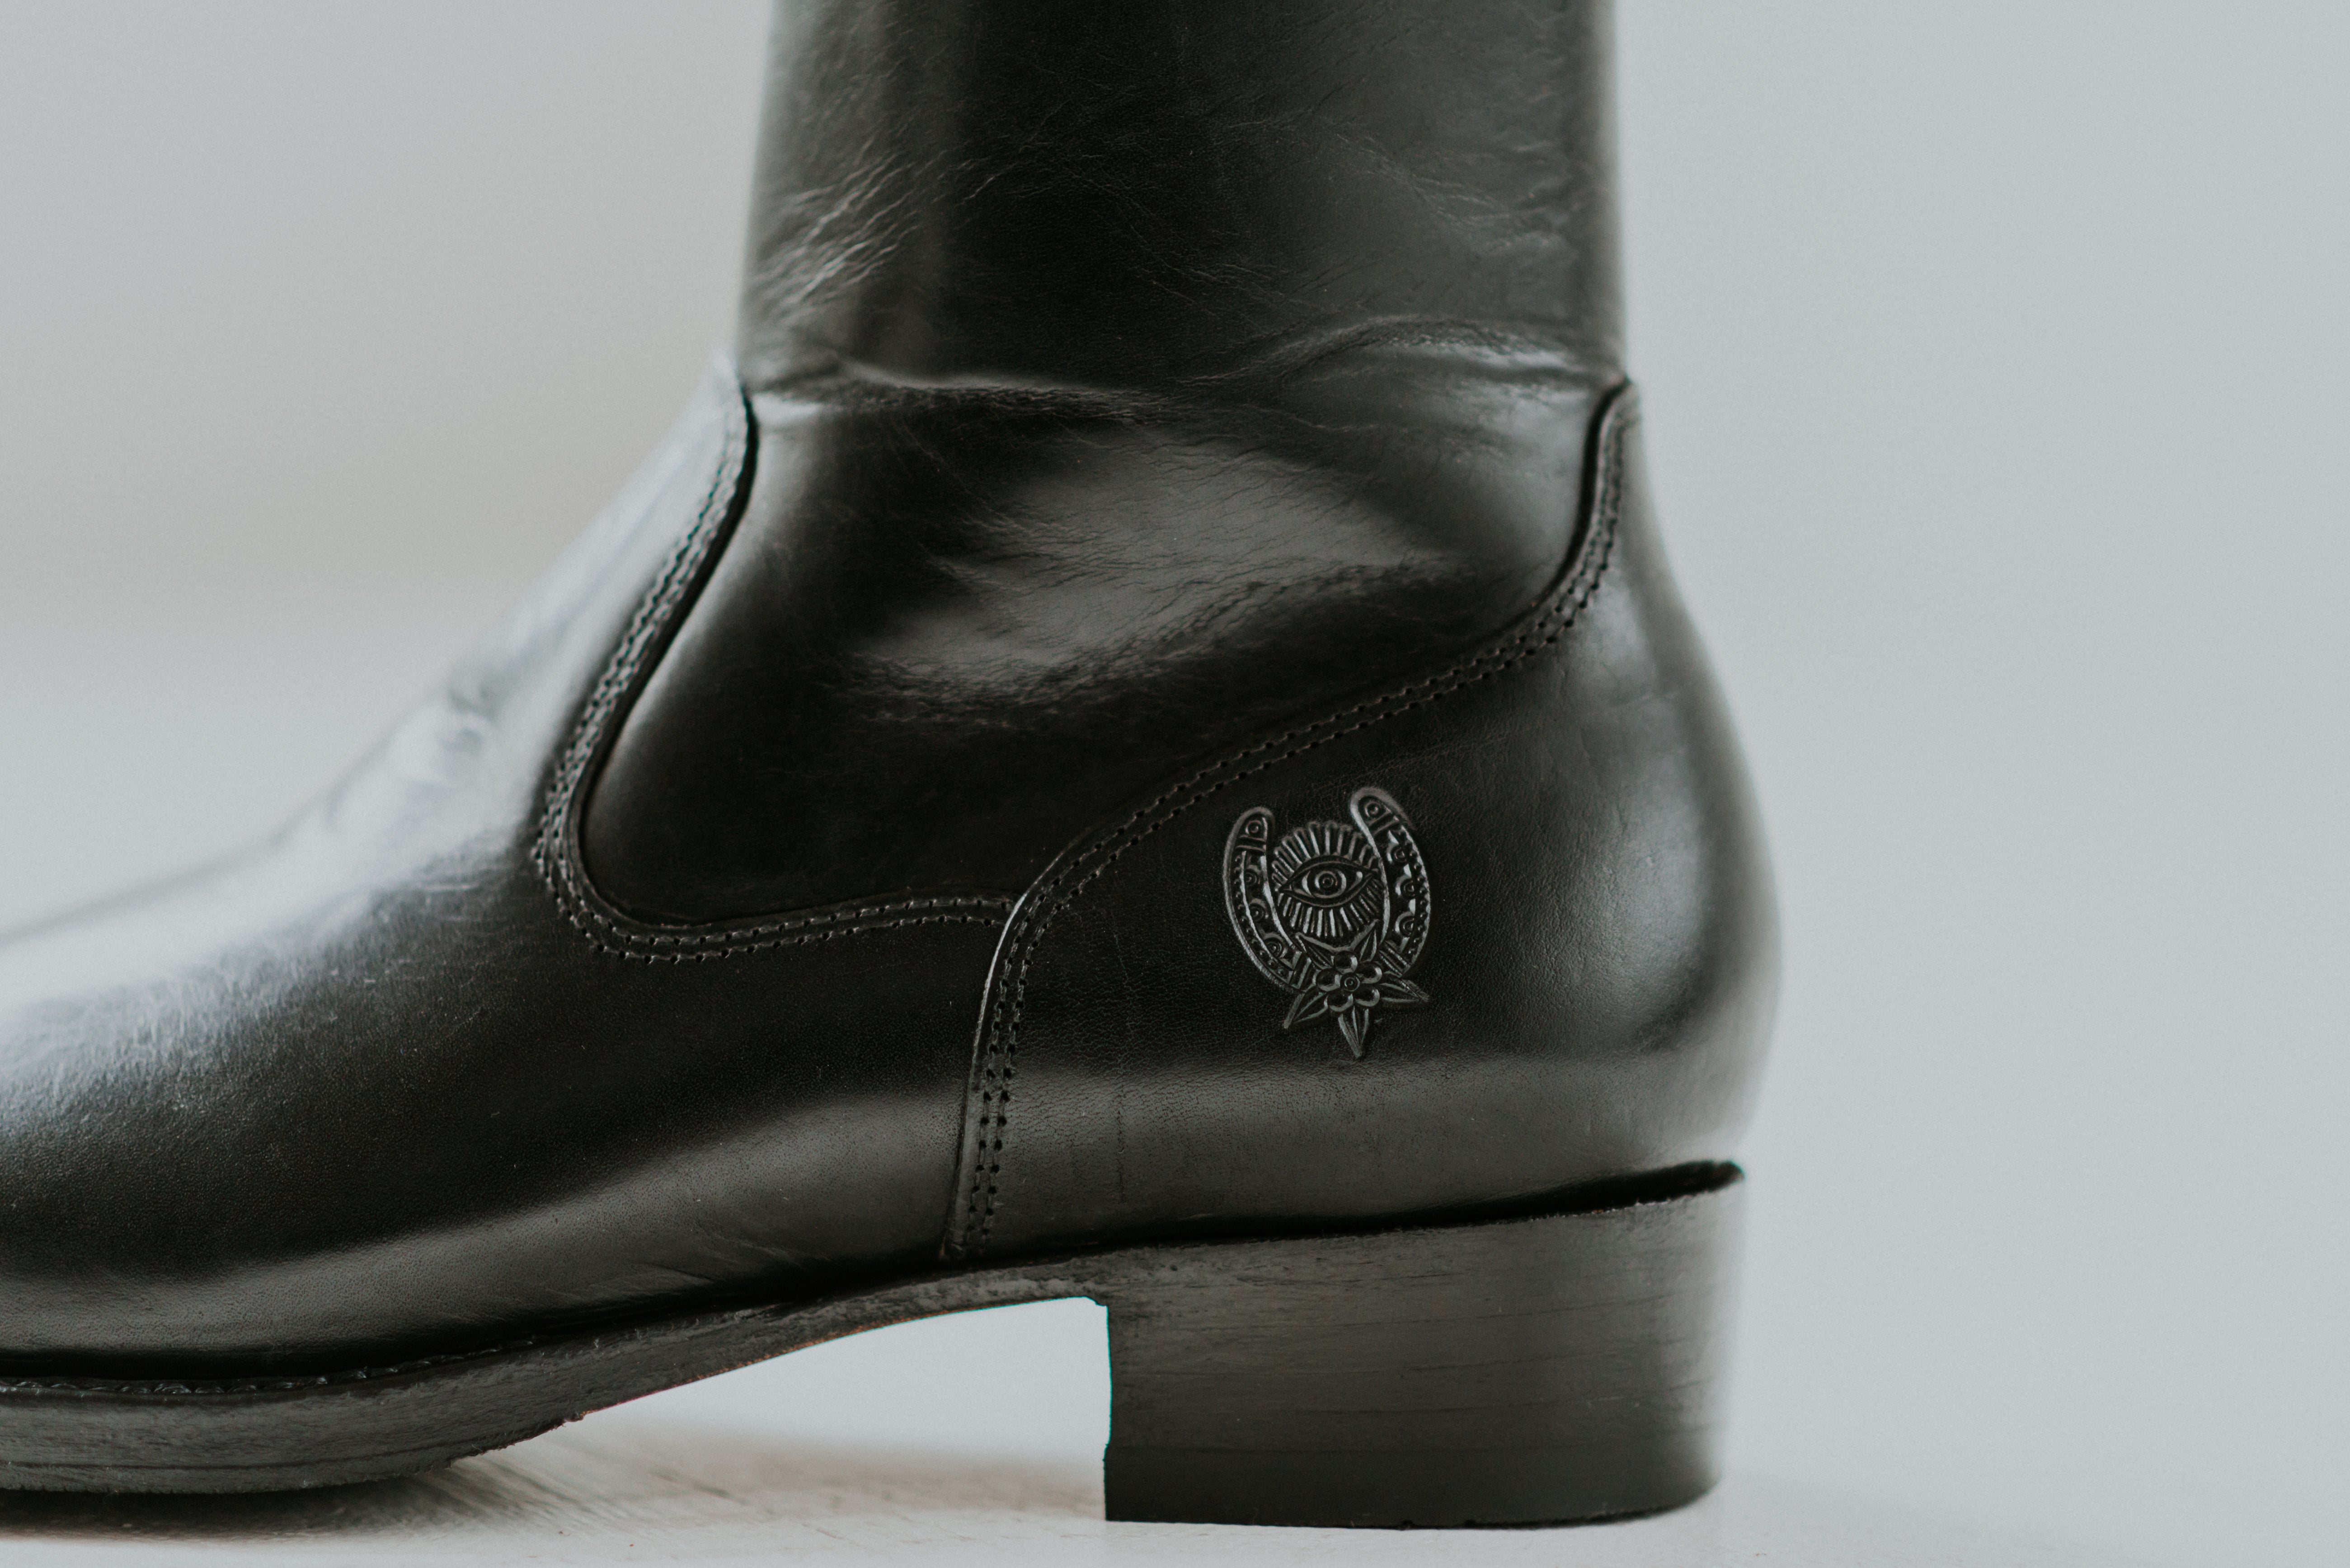 1979 Harness Boot - March 12, 2018 Release